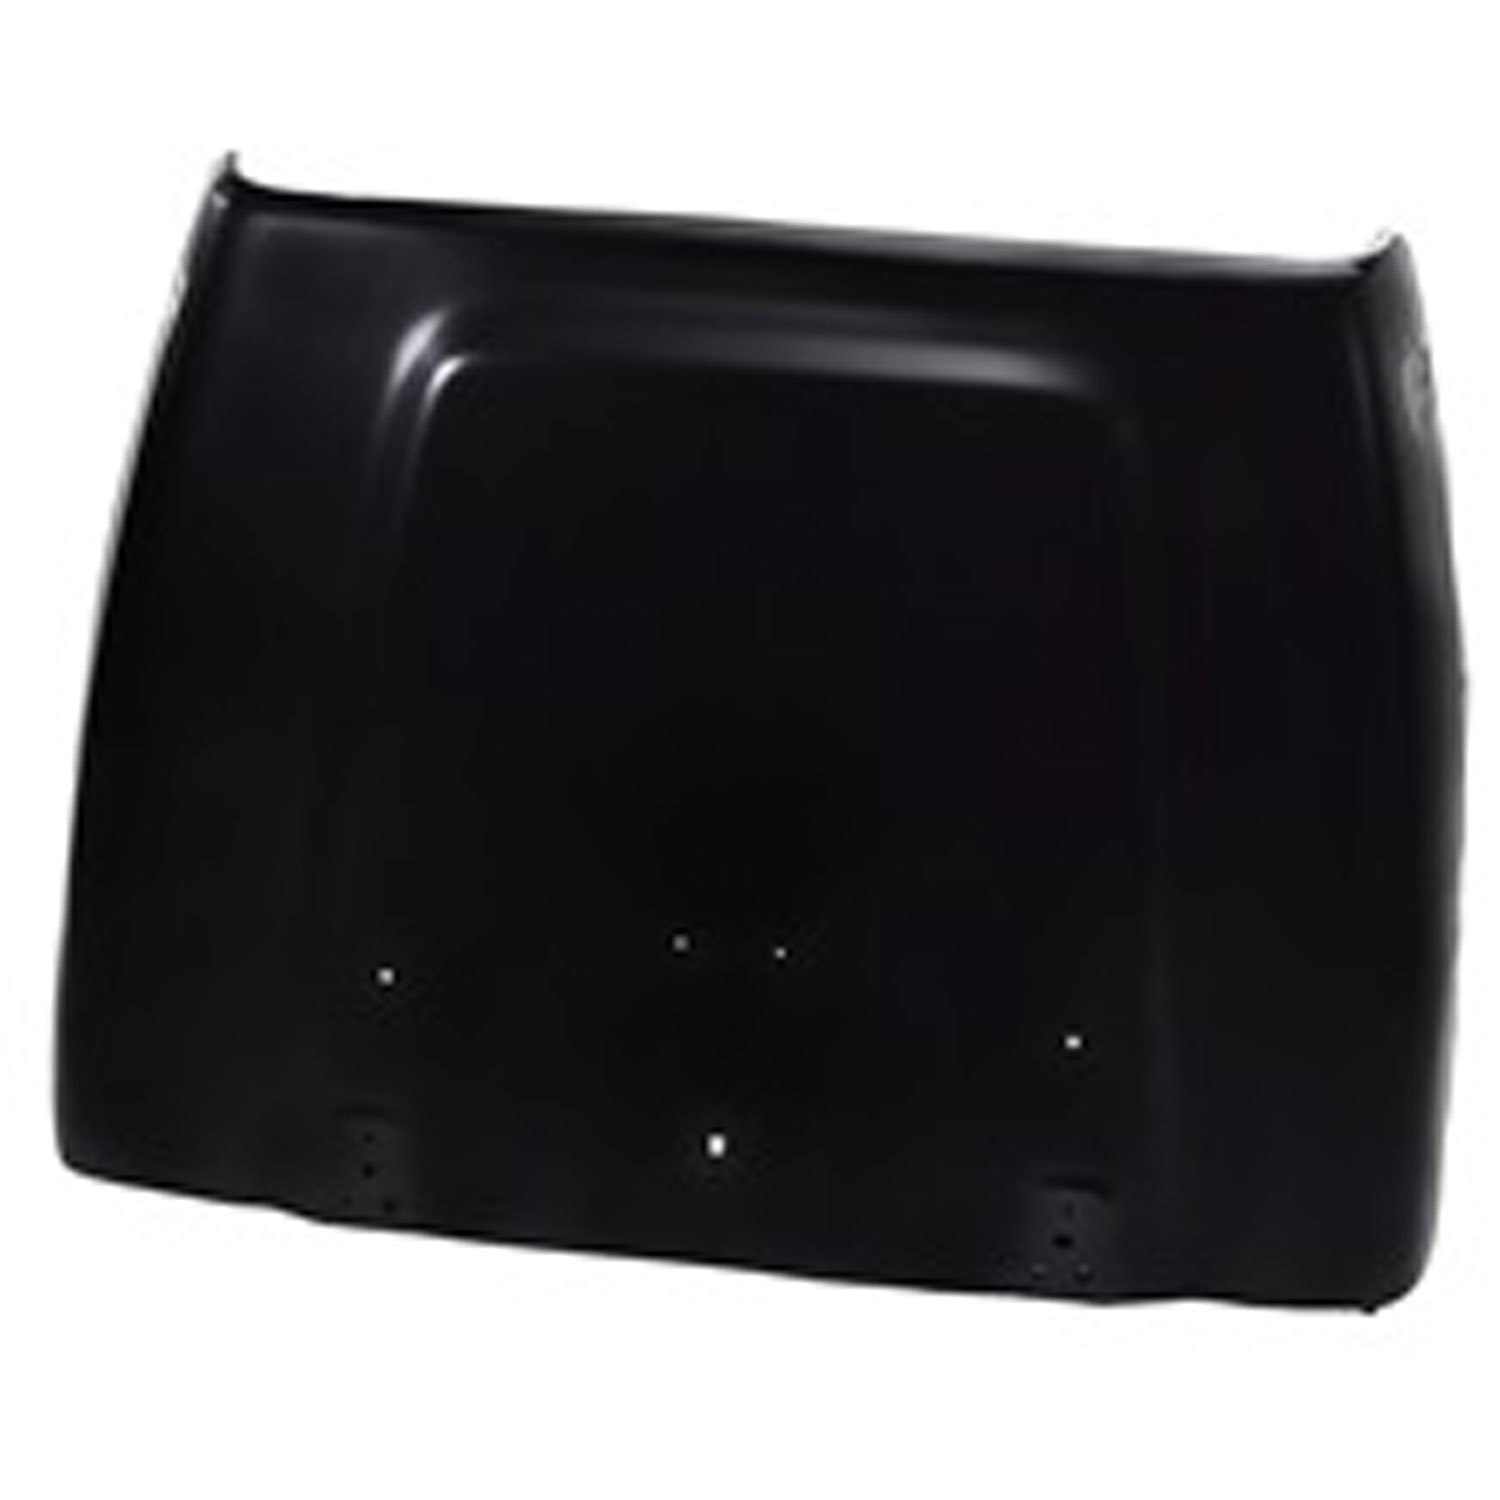 Replacement Steel Hood for 2000-2006 Jeep TJ Wrangler and 2004-2006 LJ Wrangler Unlimited